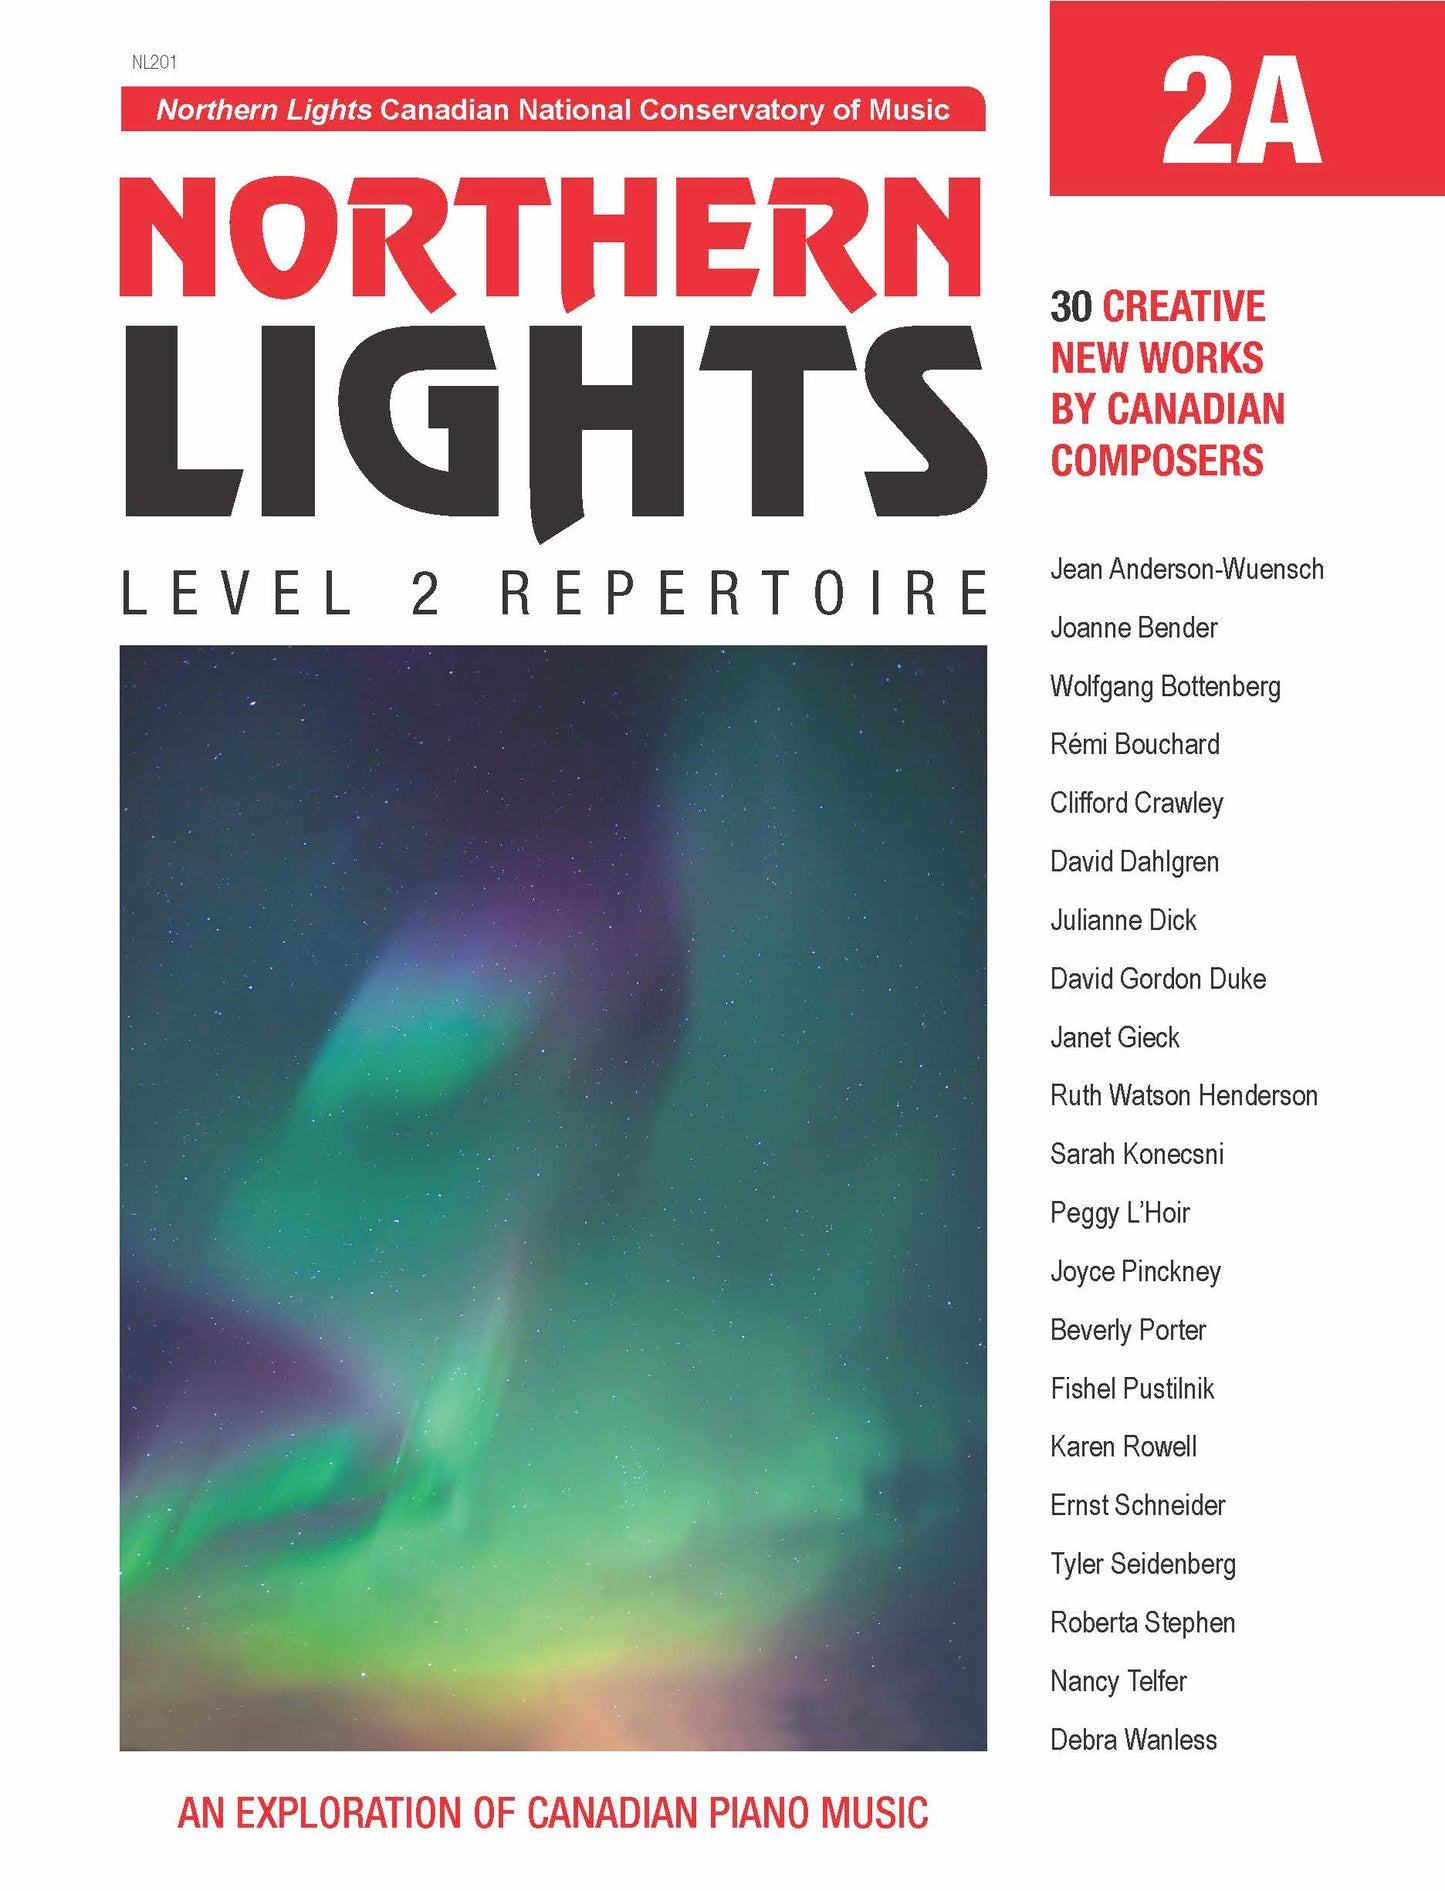 Northern Lights 2A – Repertoire